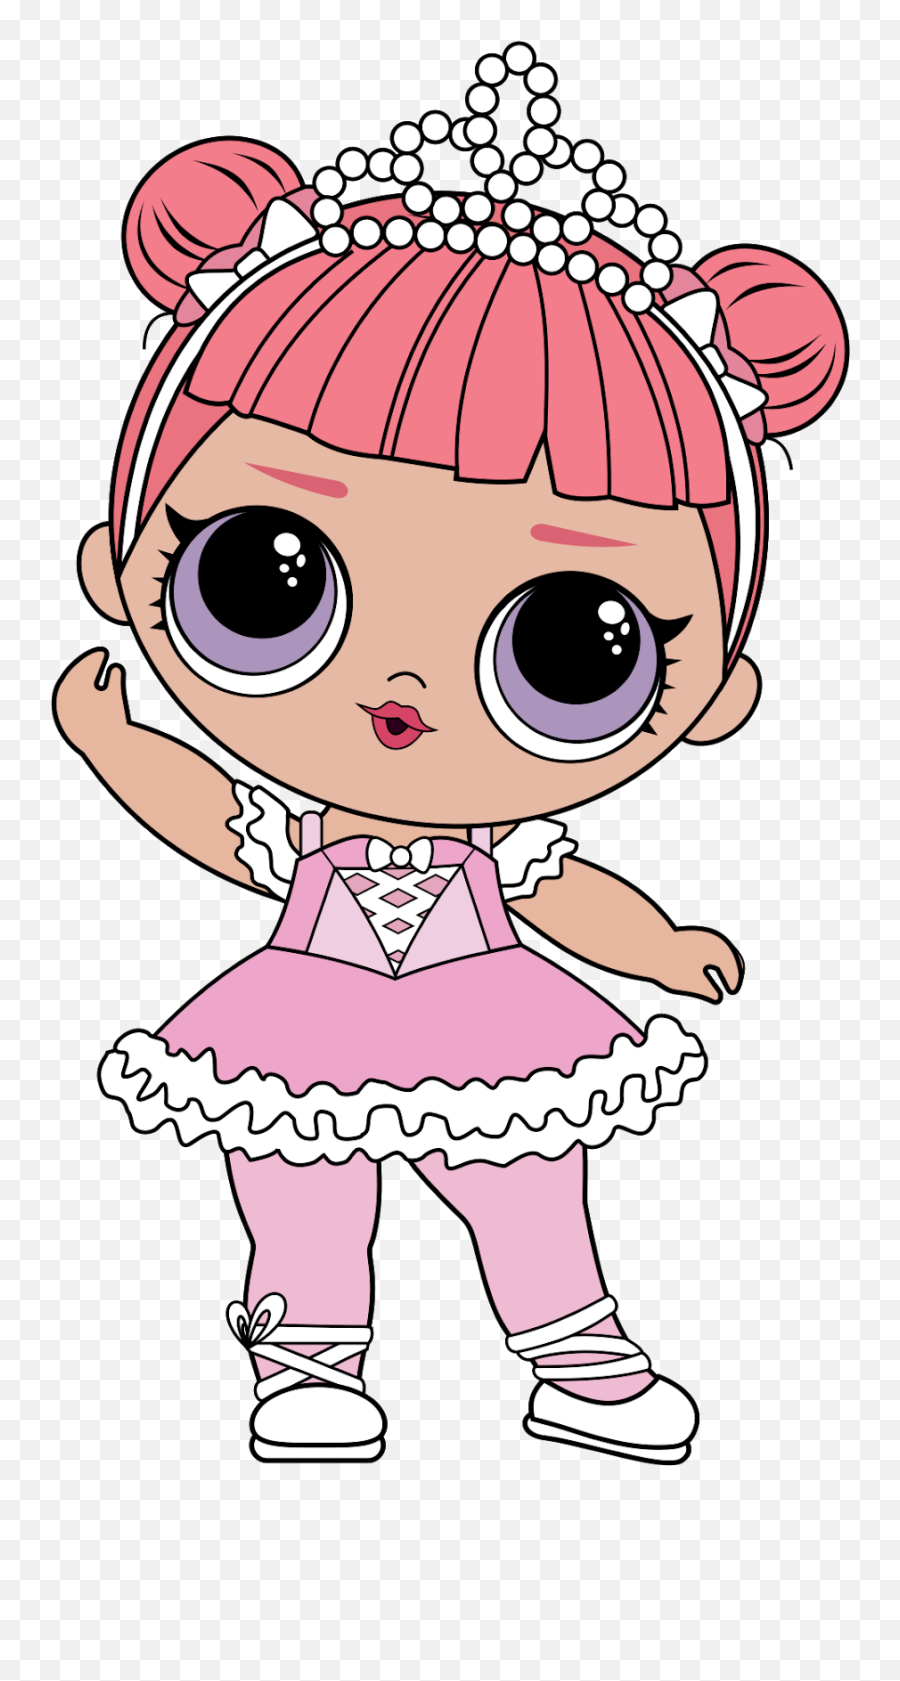 Center Stage Lol Doll Hd Png Download - Center Stage Lol Surprise,Lol Face Png